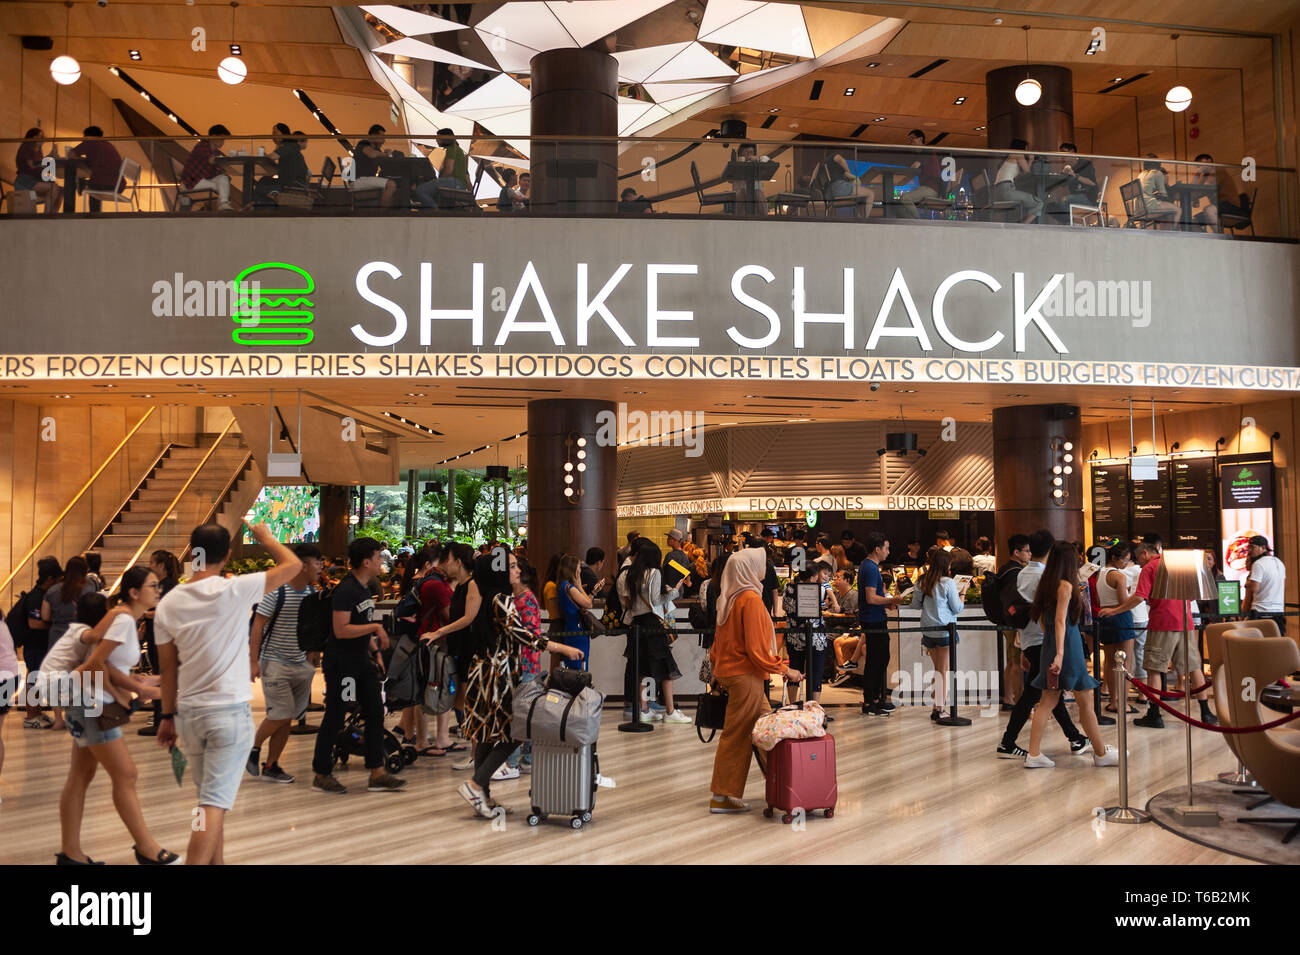 28.04.2019, Singapore, Republic of Singapore, Asia - The first fast food restaurant of the Shake Shack chain in Singapore at Jewel Changi Airport. Stock Photo